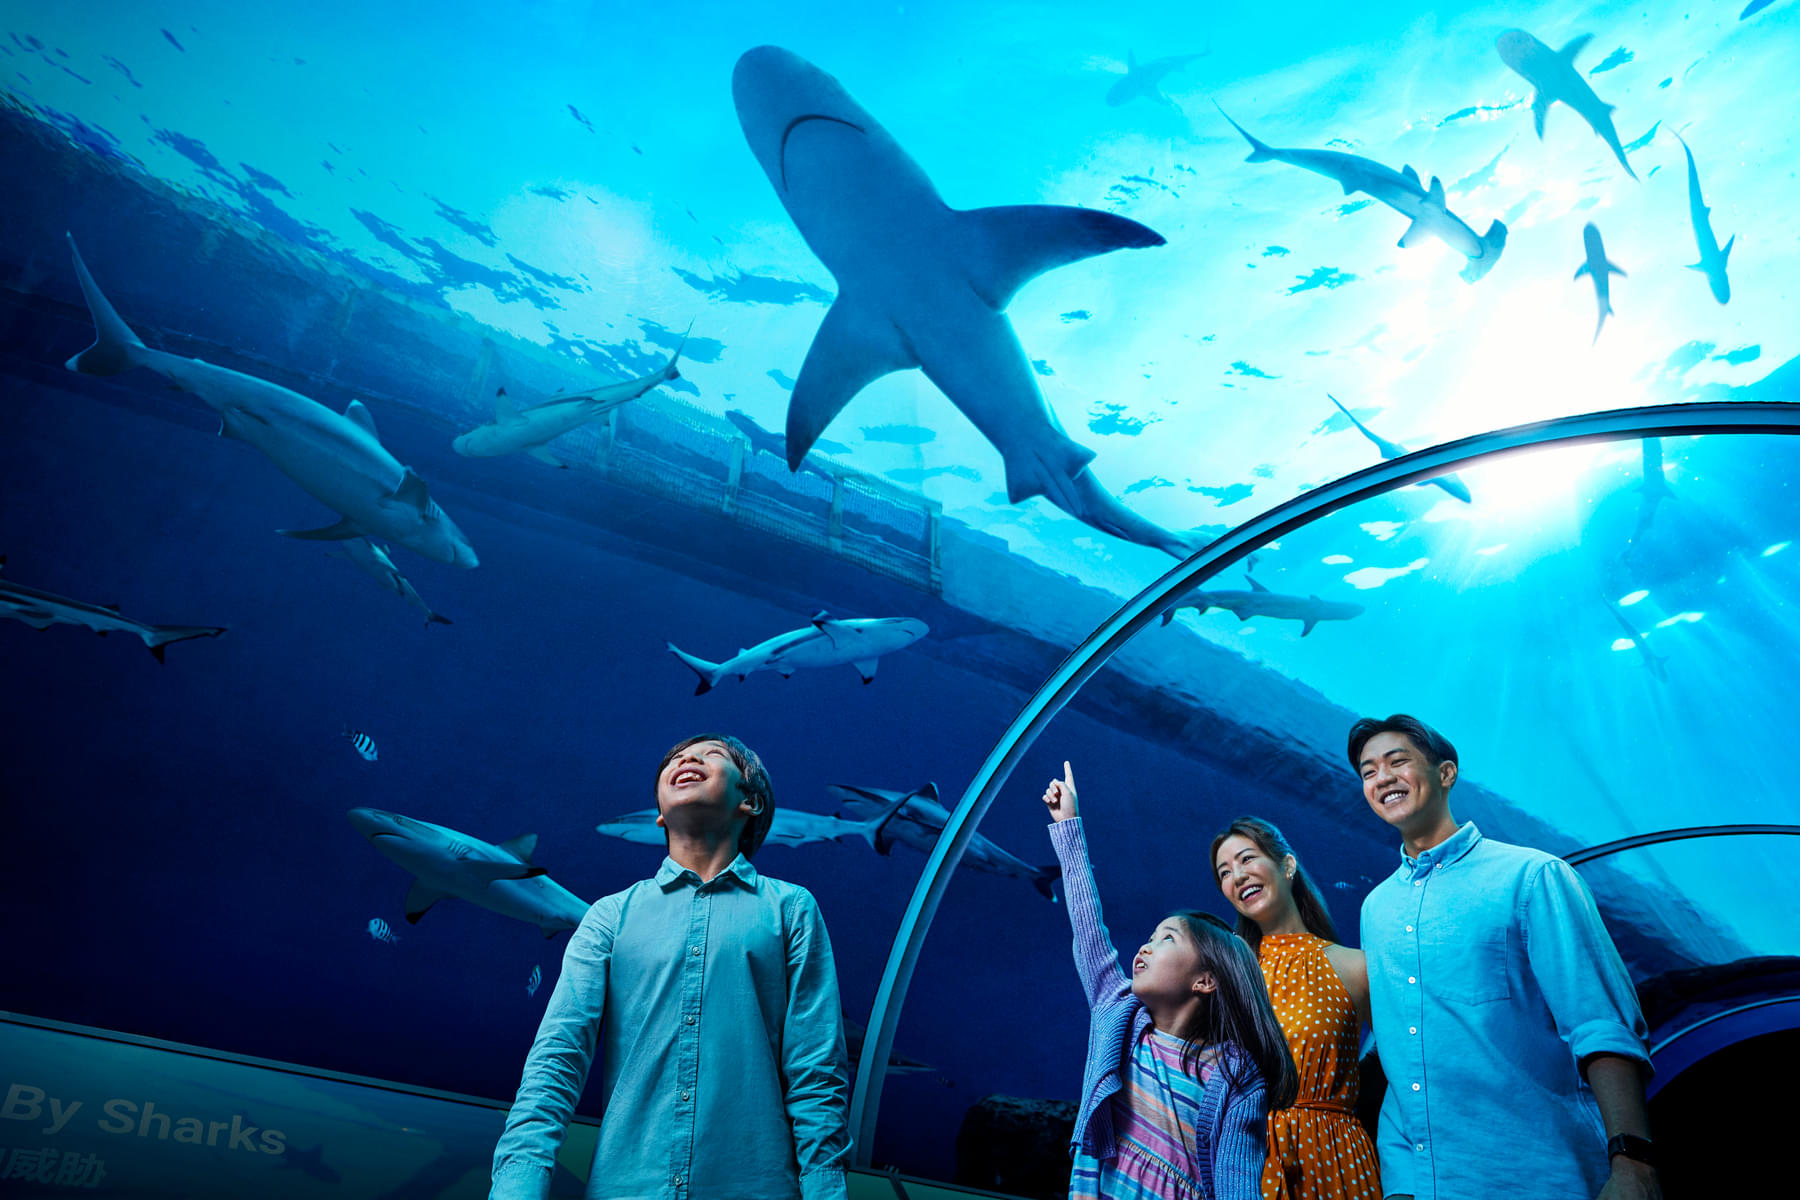 Experience the wonders of the S.E.A. Aquarium in Singapore.